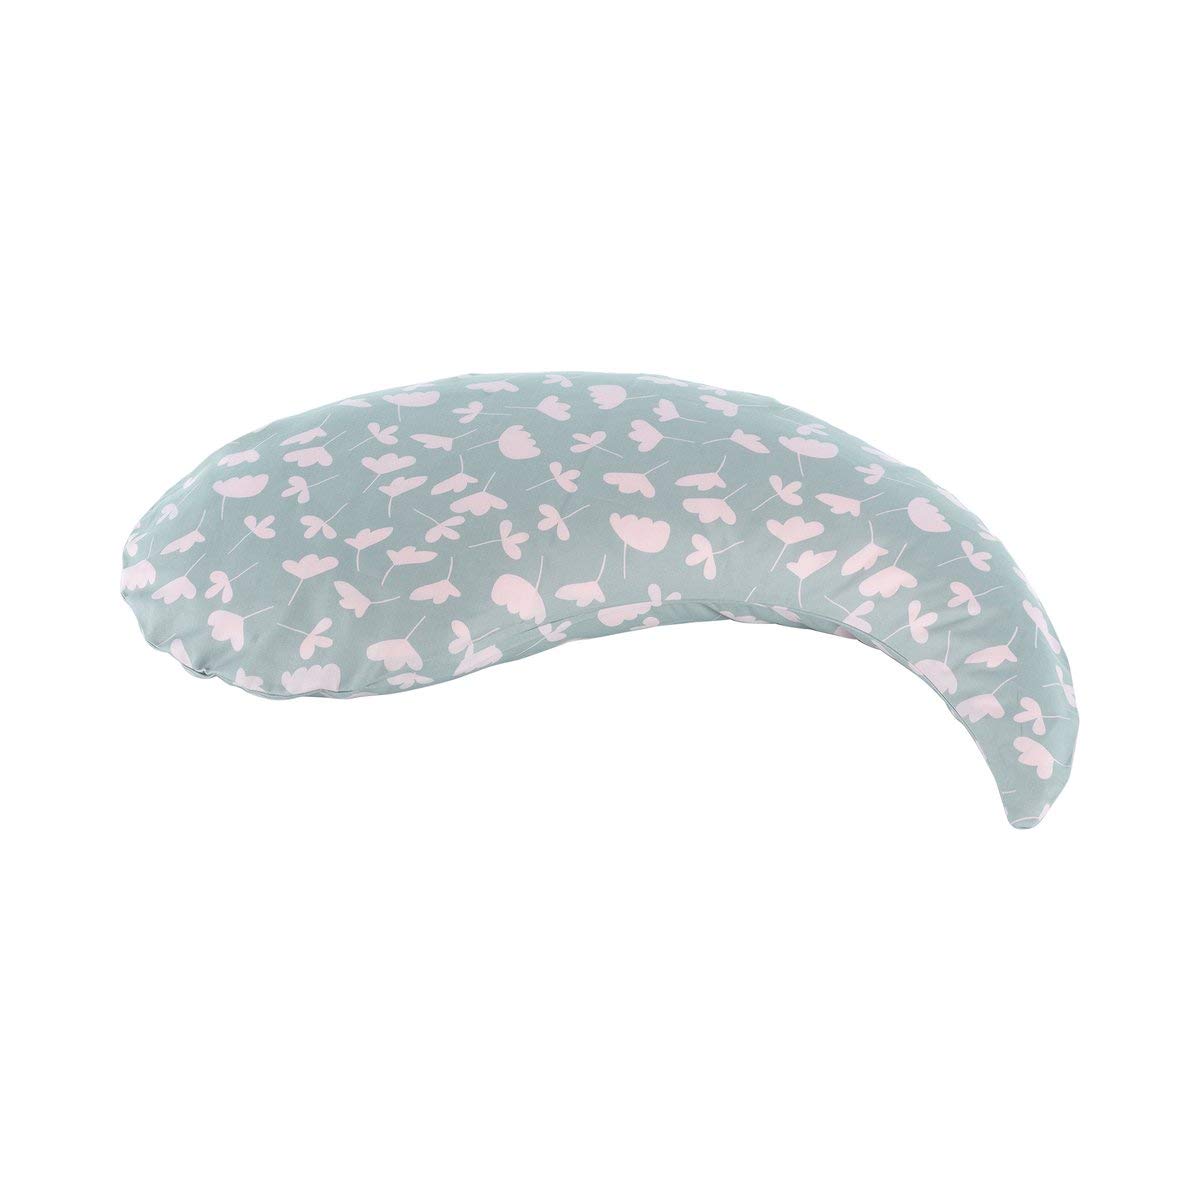 Theraline Yinnie Nursing Pillow - Pillow for Pregnant Women & Breastfeeding Women - Can be Used as a Belly Support or Nursing Pillow - 135 x 35 cm - Filling Made of Microbeads